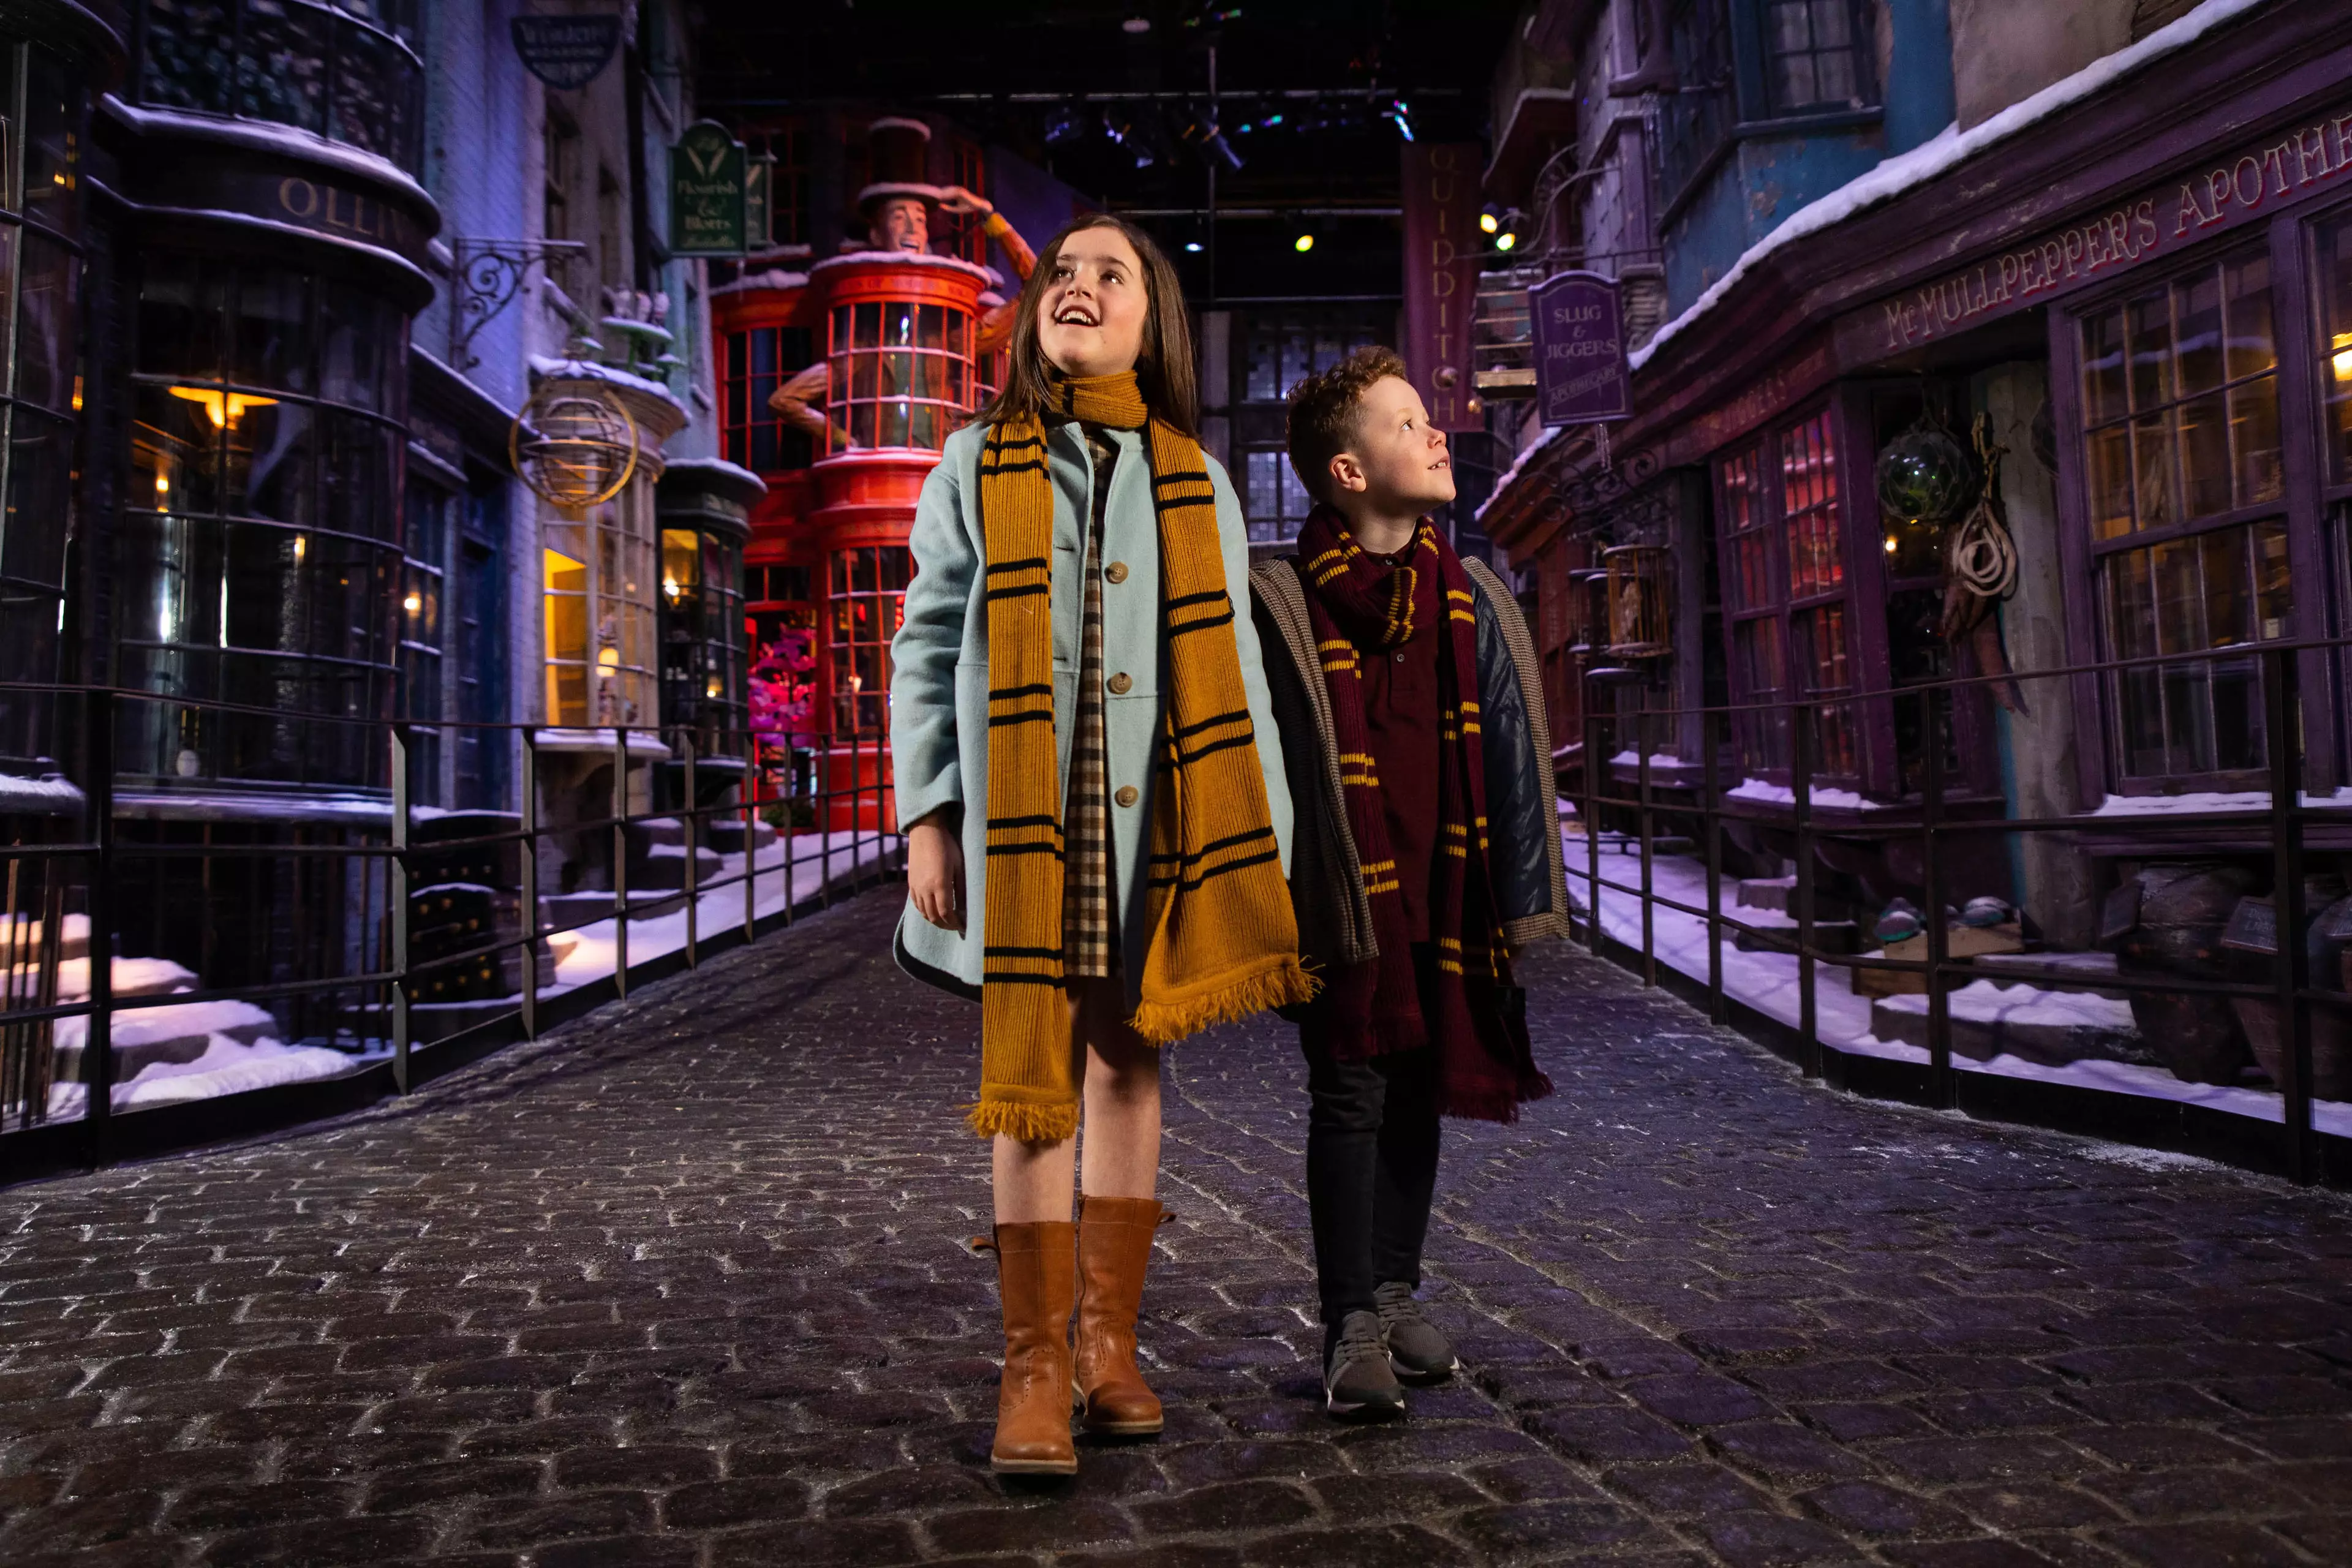 It's the first ever time Diagon Alley as been covered in snow (